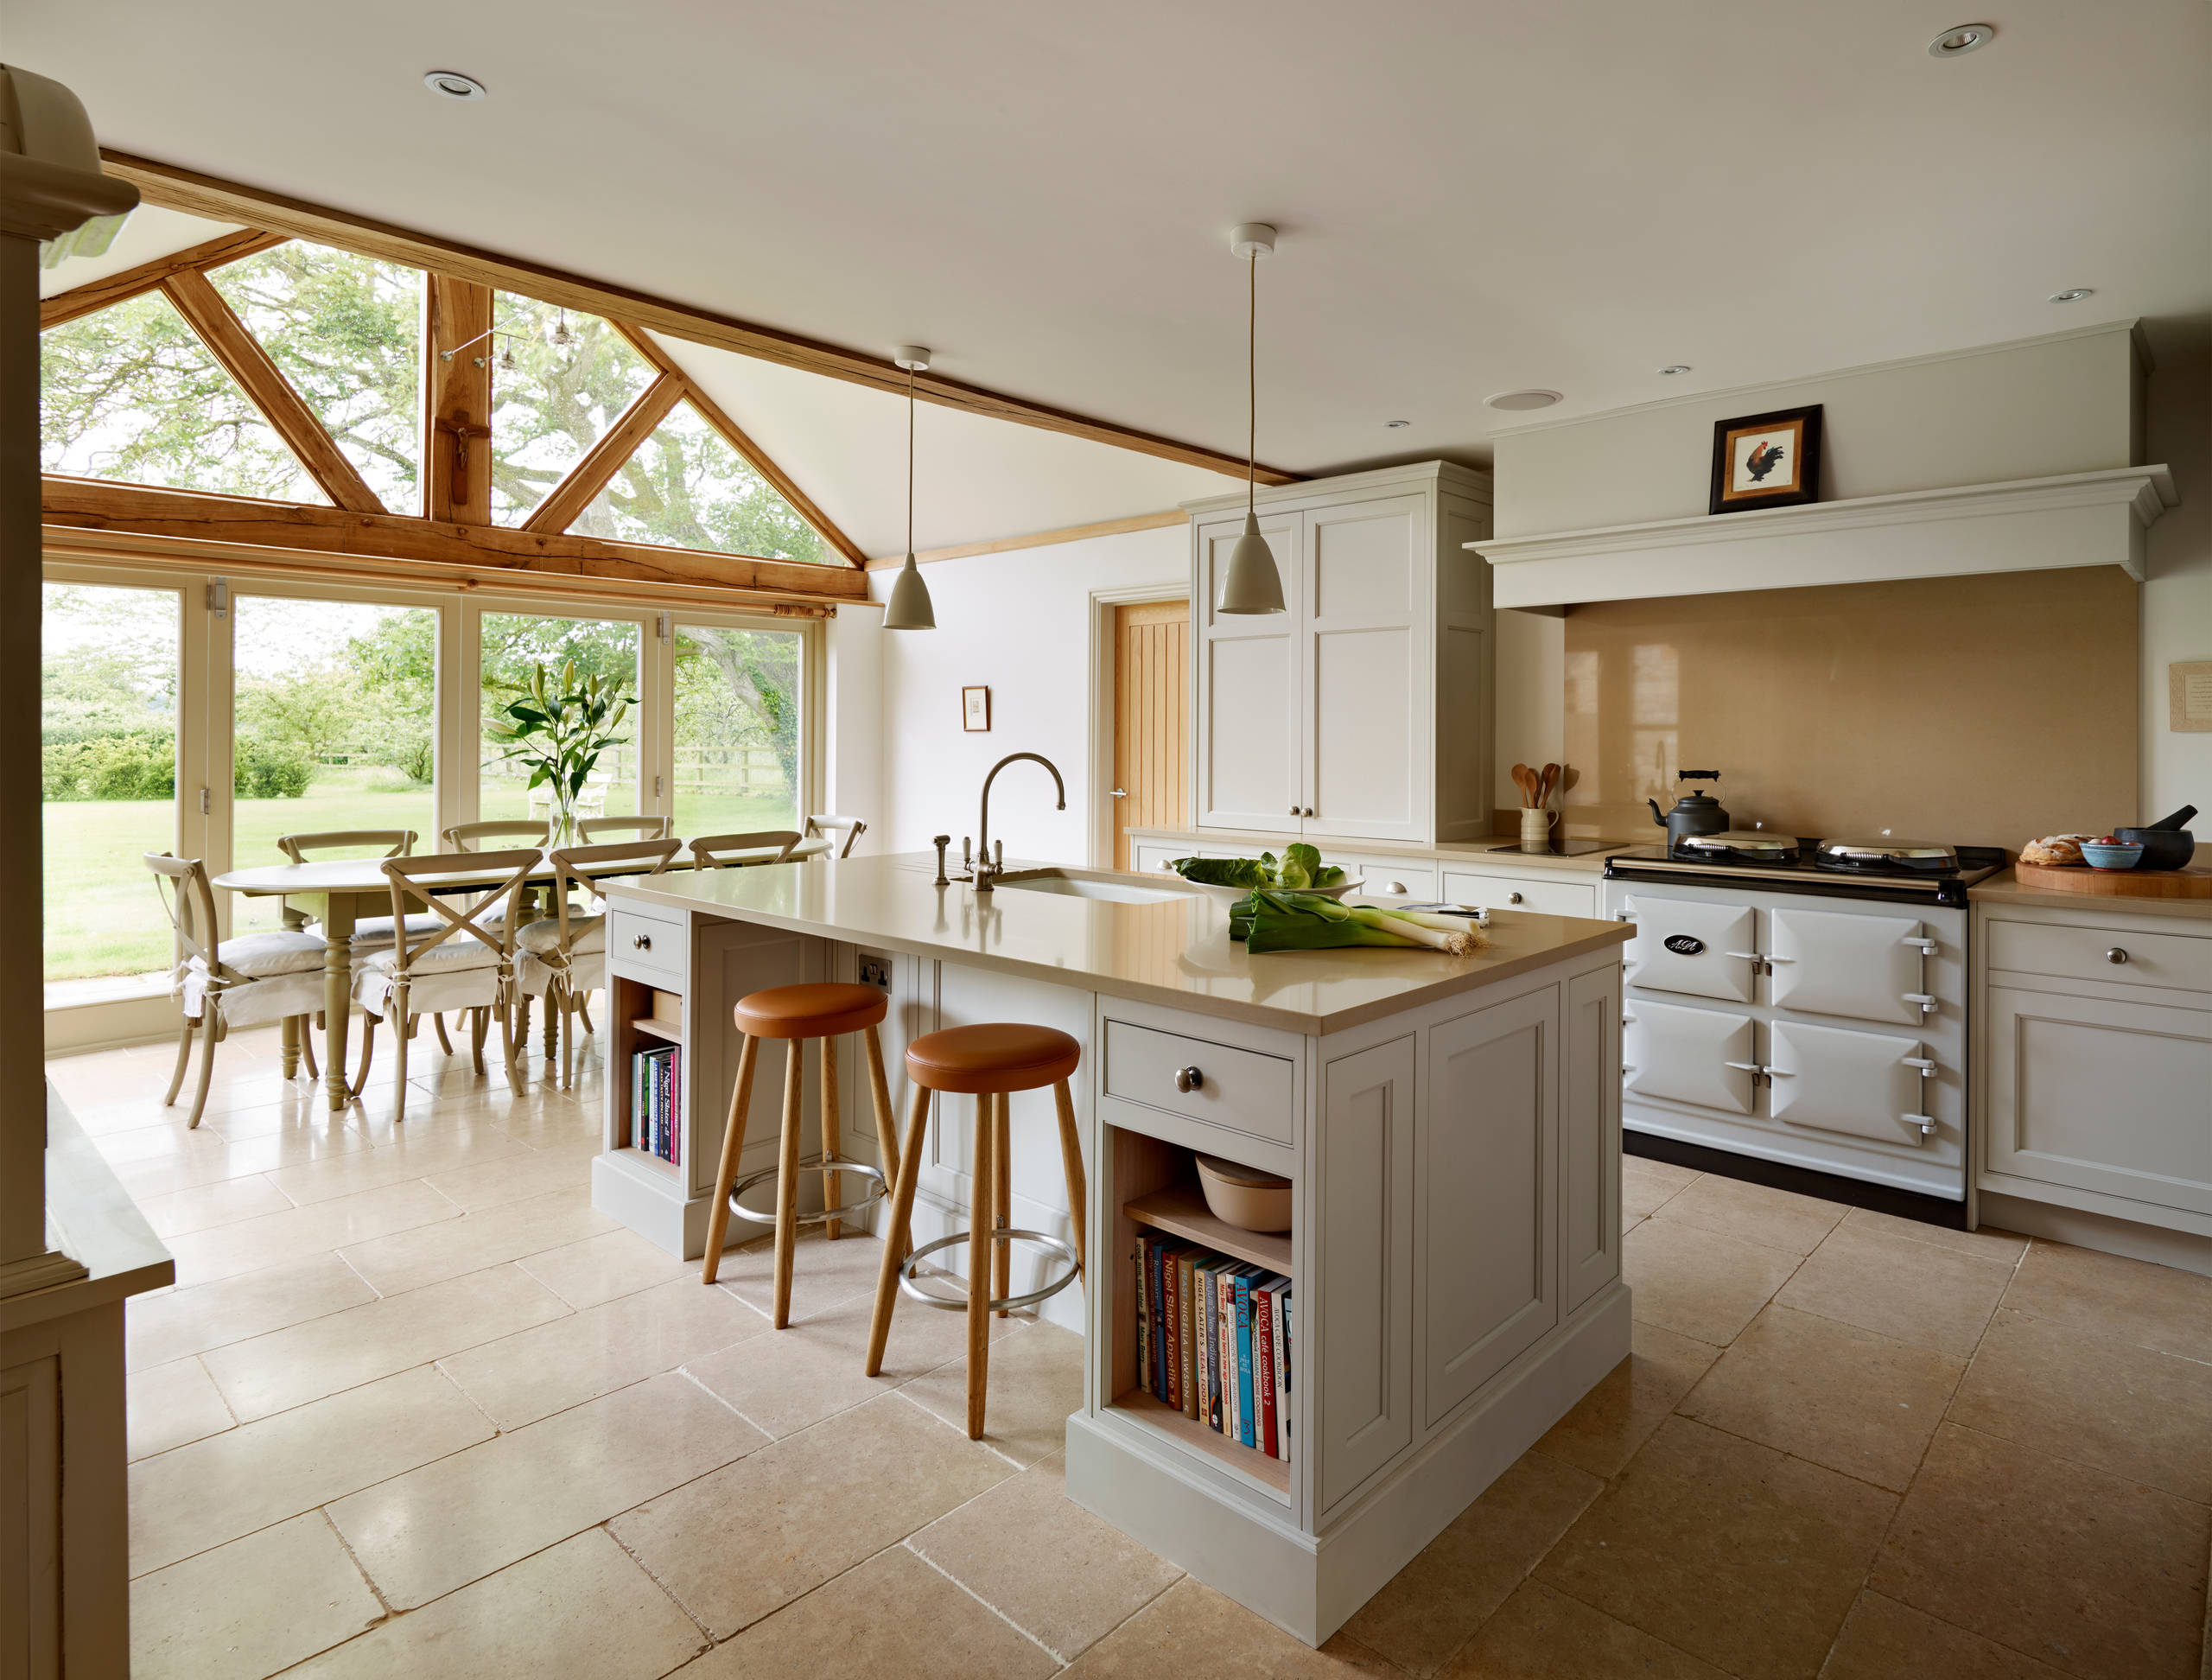 Layout Ideas for an Open-plan Kitchen and Living Space | Houzz UK